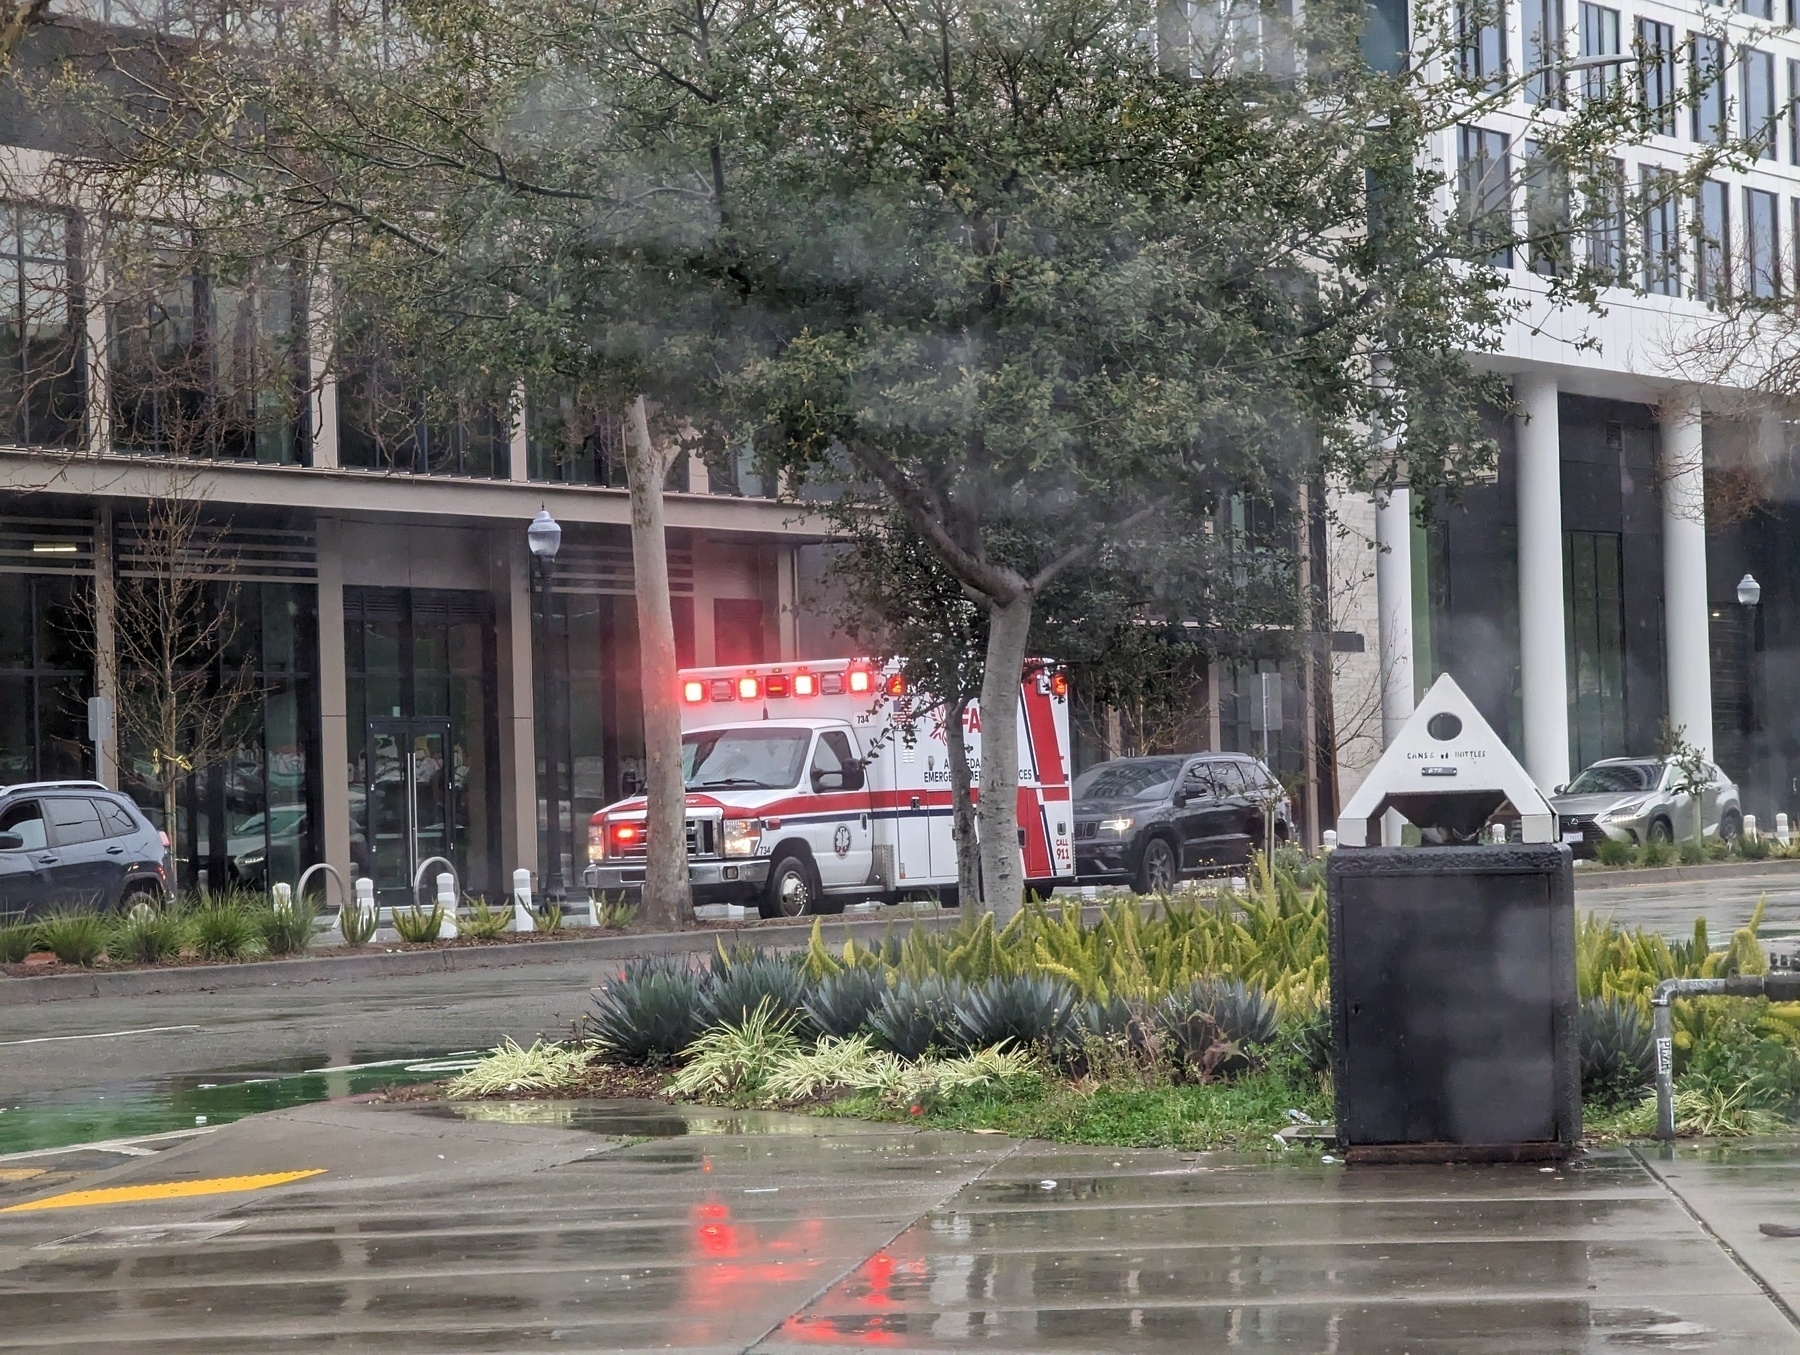 A Falck ambulance with its lights aglow and their glint reflecting on rain wet sidewalks parks along 27th Street just west of Harrison Street around midday Thursday, March 9, 2023 in Oakland, California while waiting to respond to an Oakland Fire Department medical emergency call about a block away in northbound Harrison lanes.